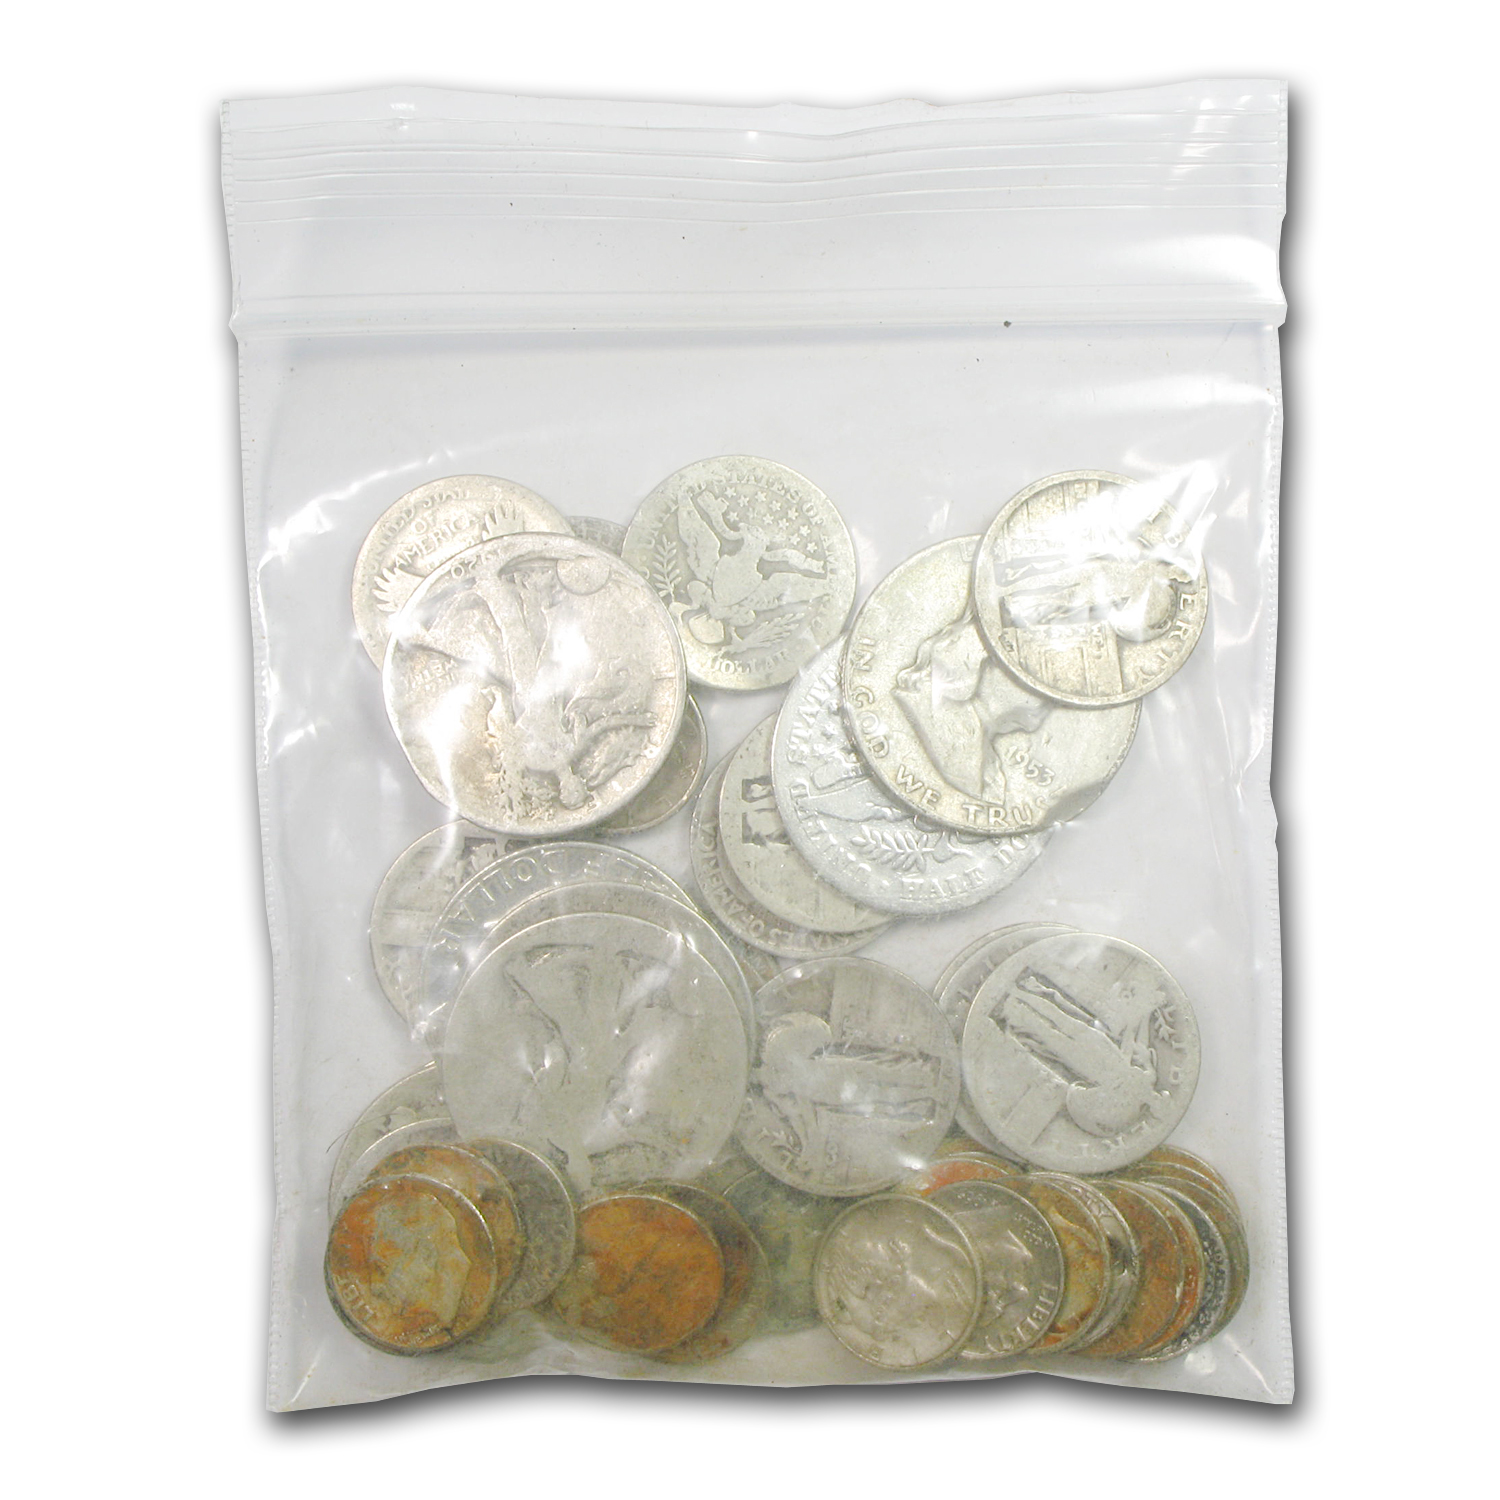 90 percent silver coins for sale